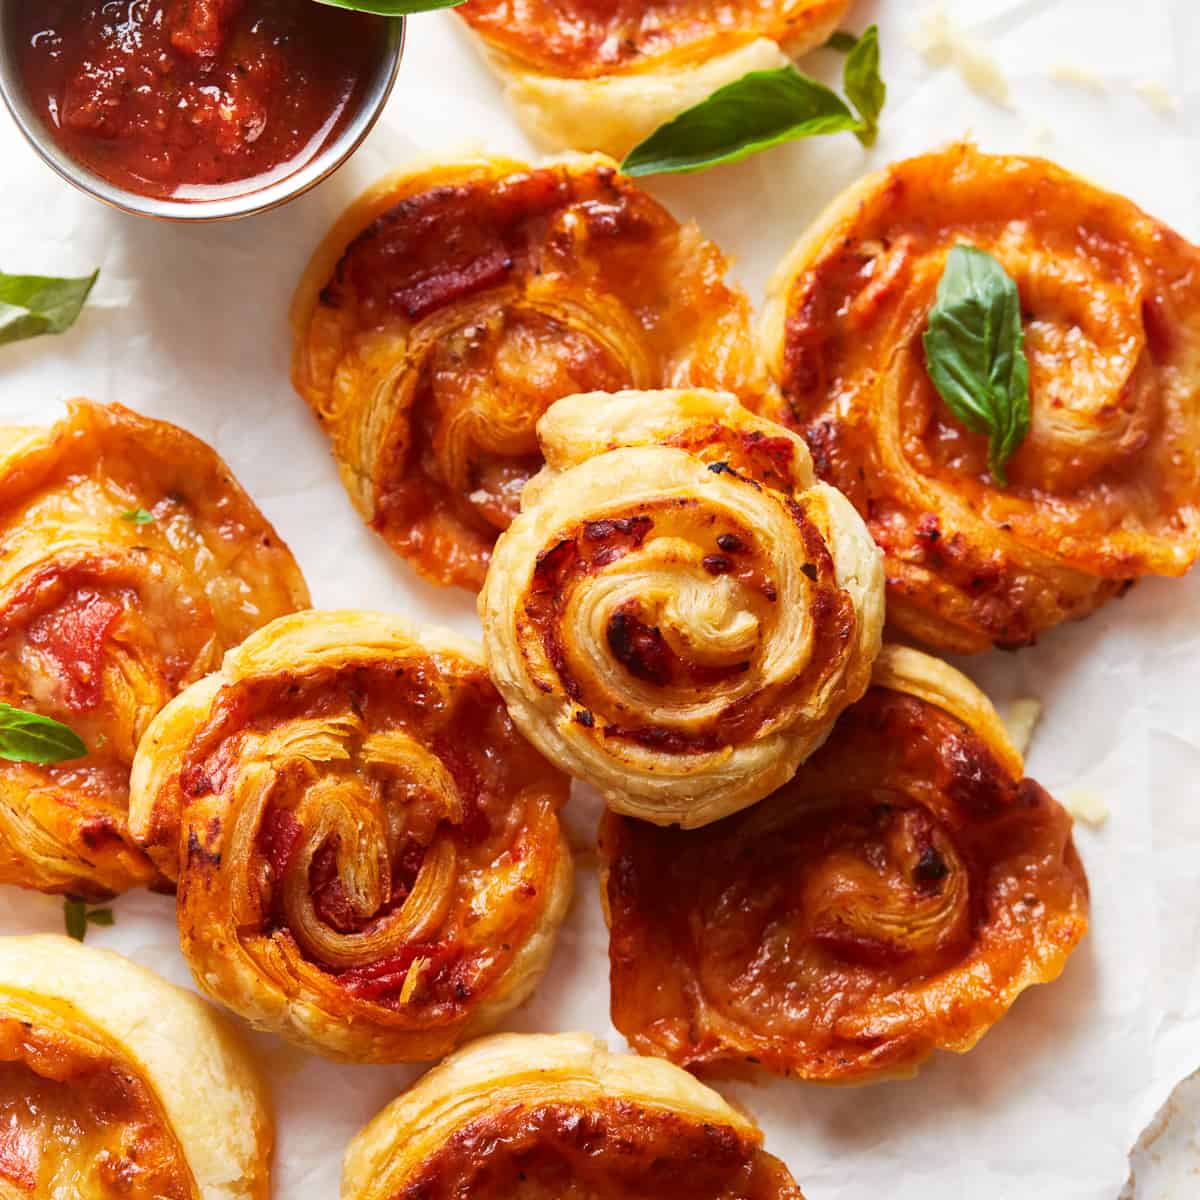 https://www.thecookierookie.com/wp-content/uploads/2015/09/featured-pepperoni-pizza-rolls-recipe.jpg